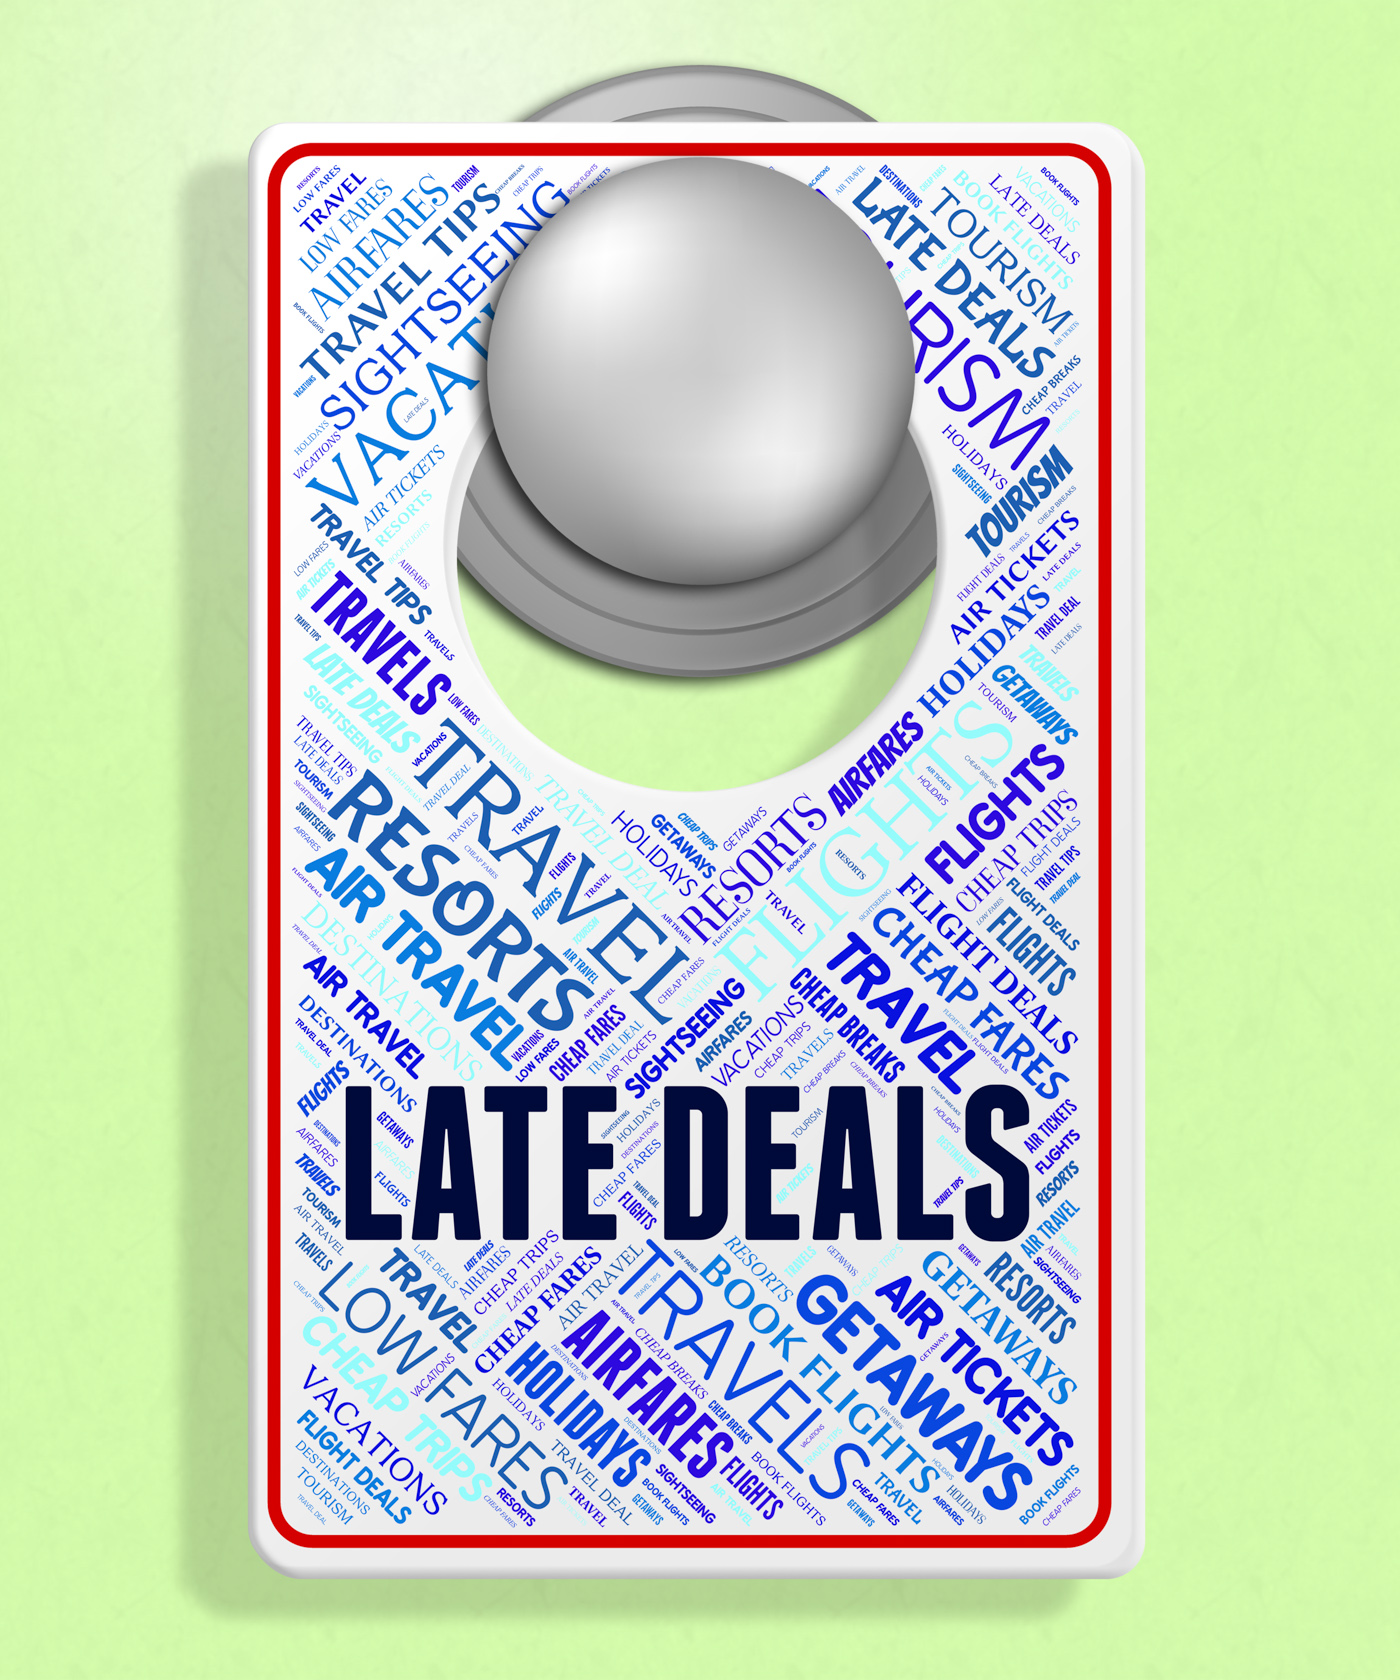 Late deals indicates last minute and bargain photo